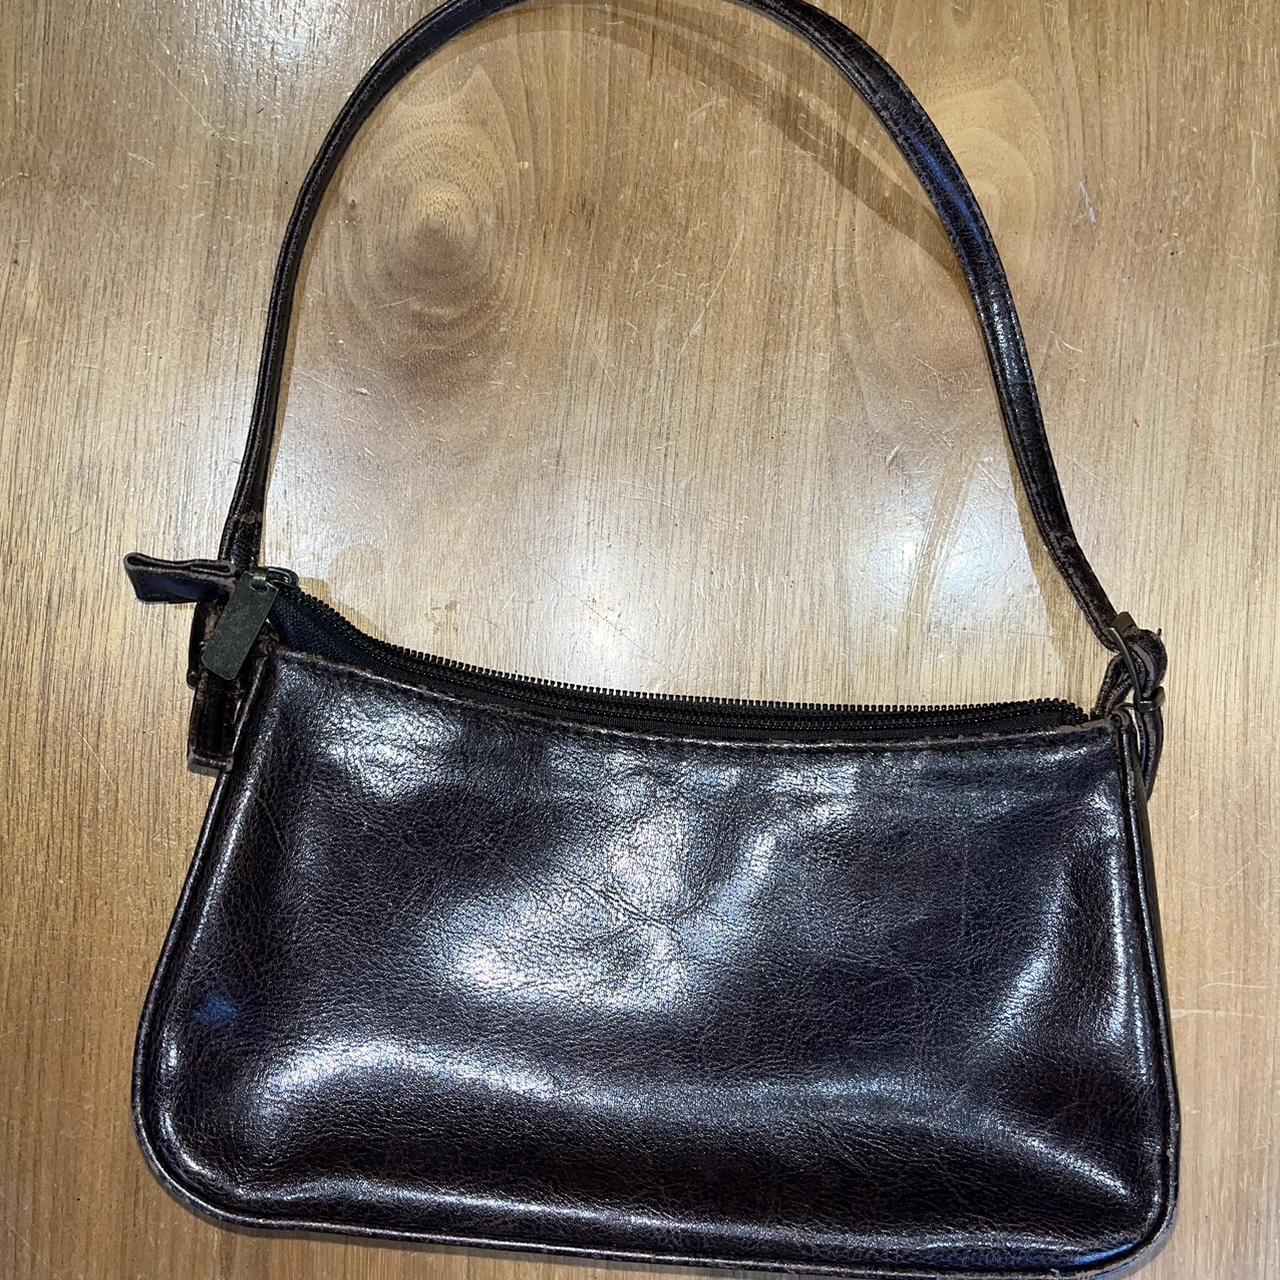 Small bag . Brown and leather.Old but still in good... - Depop